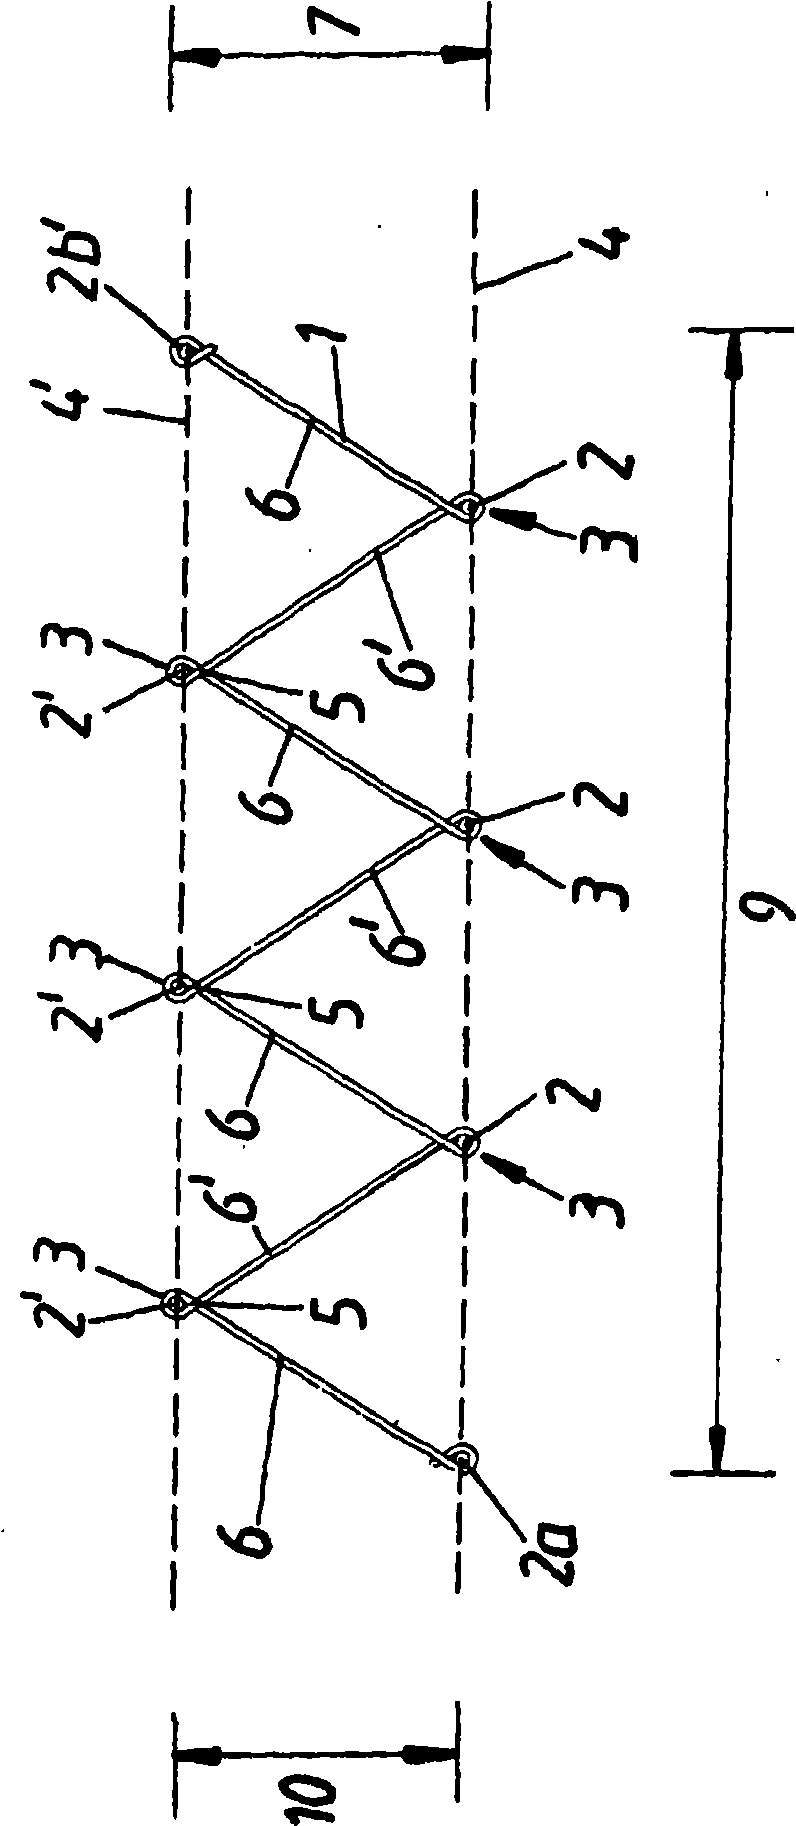 Grid structure